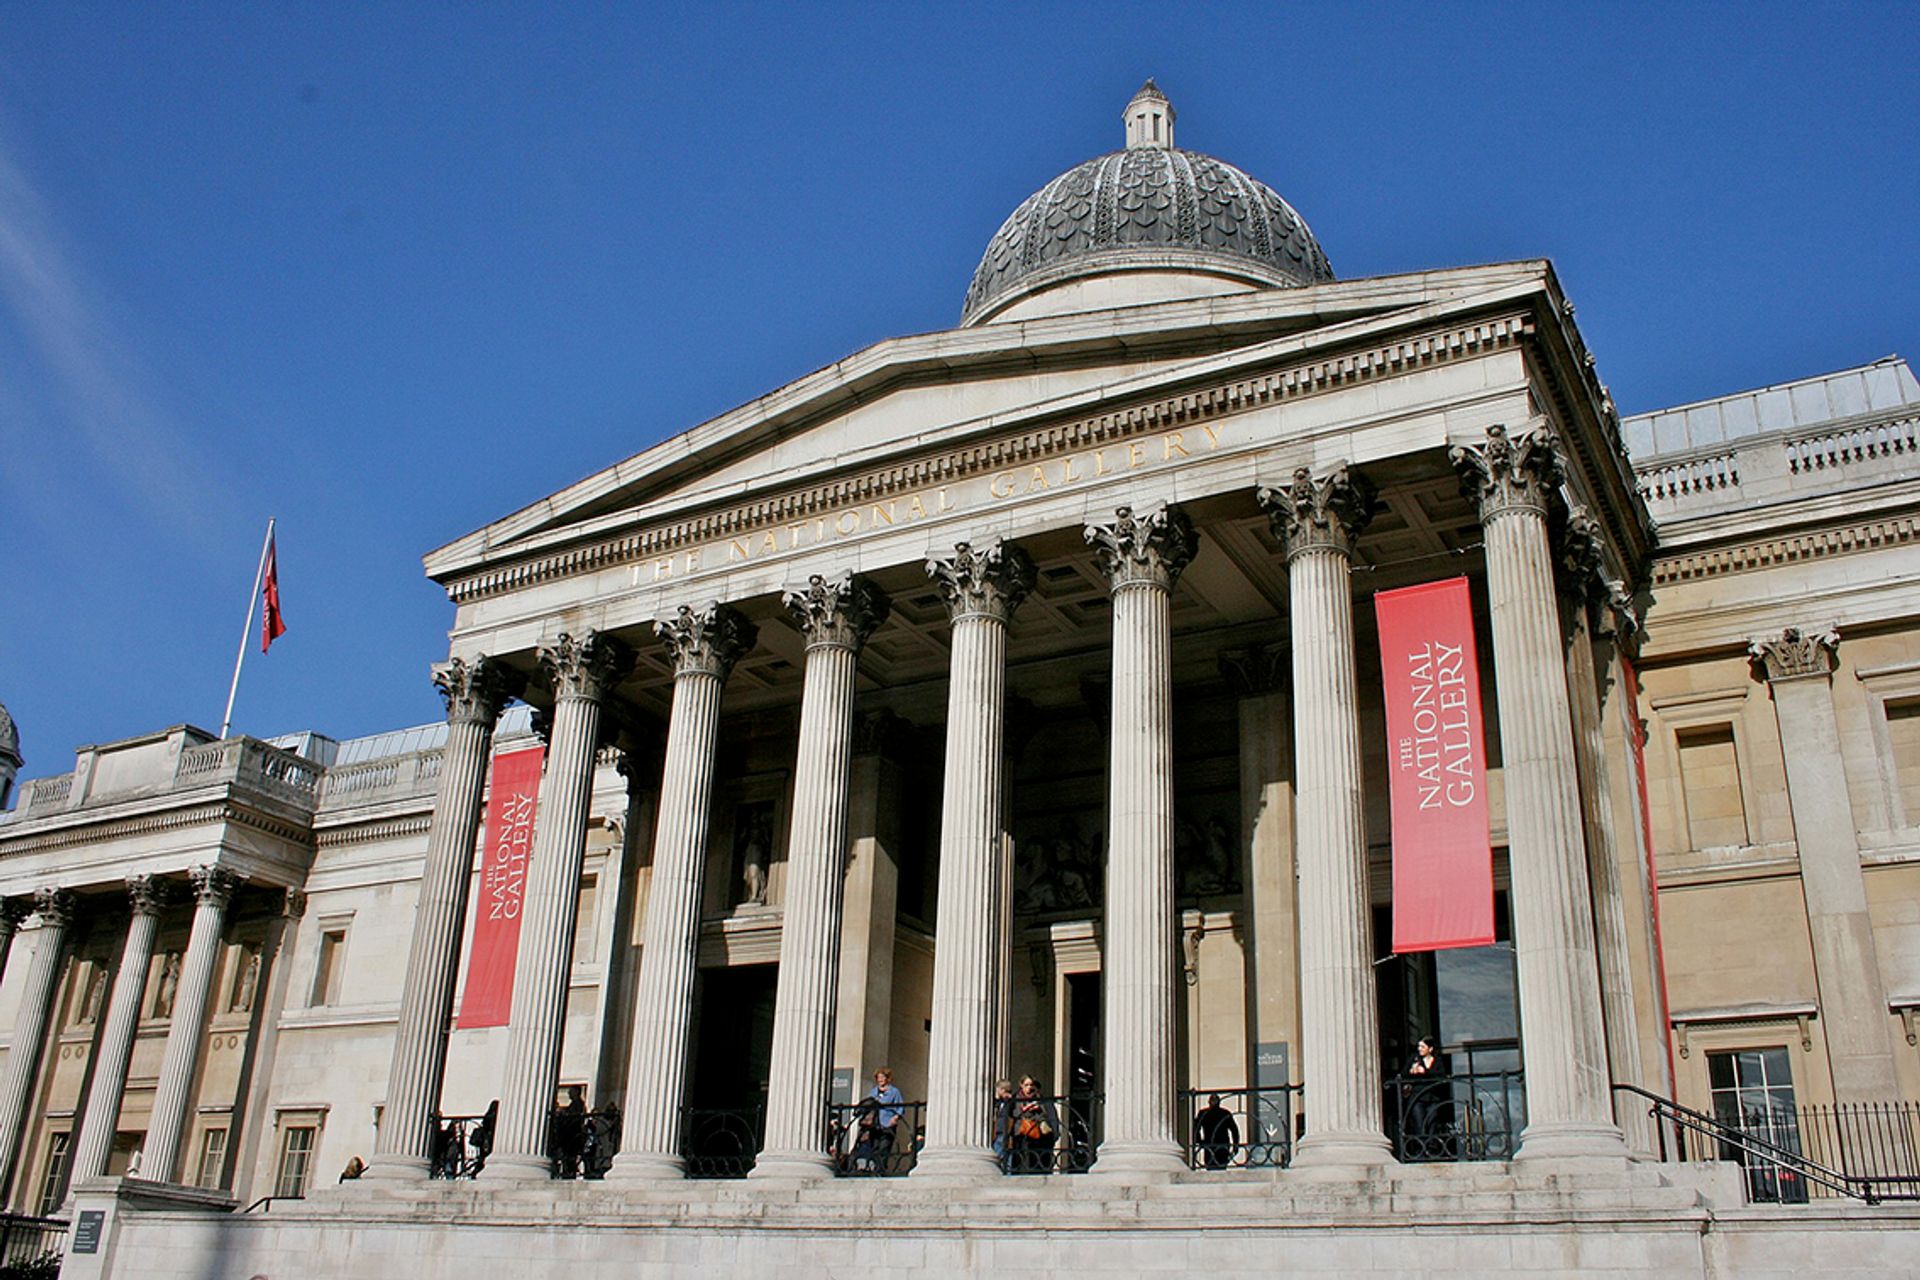 The National Gallery in London 